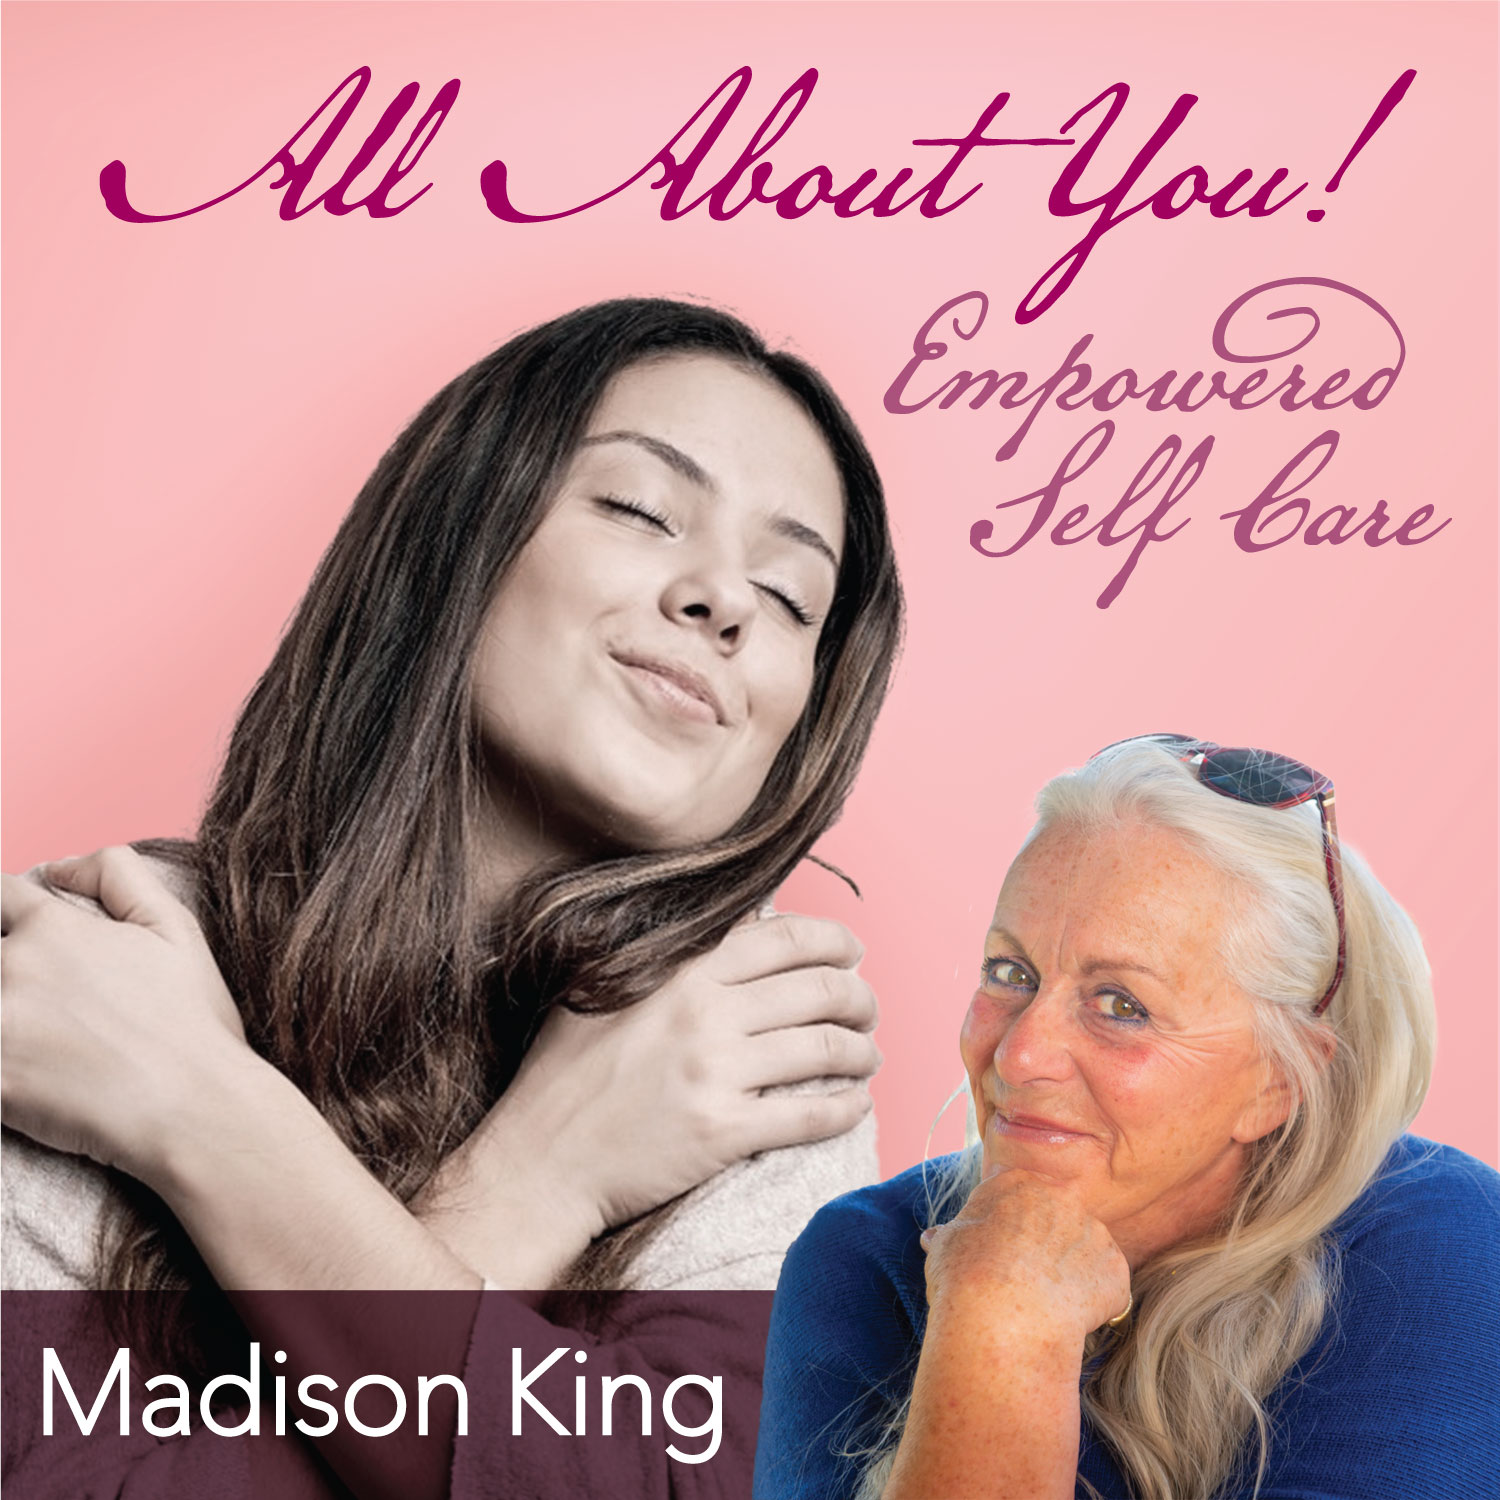 All About You — Empowered Self Care with Madison King